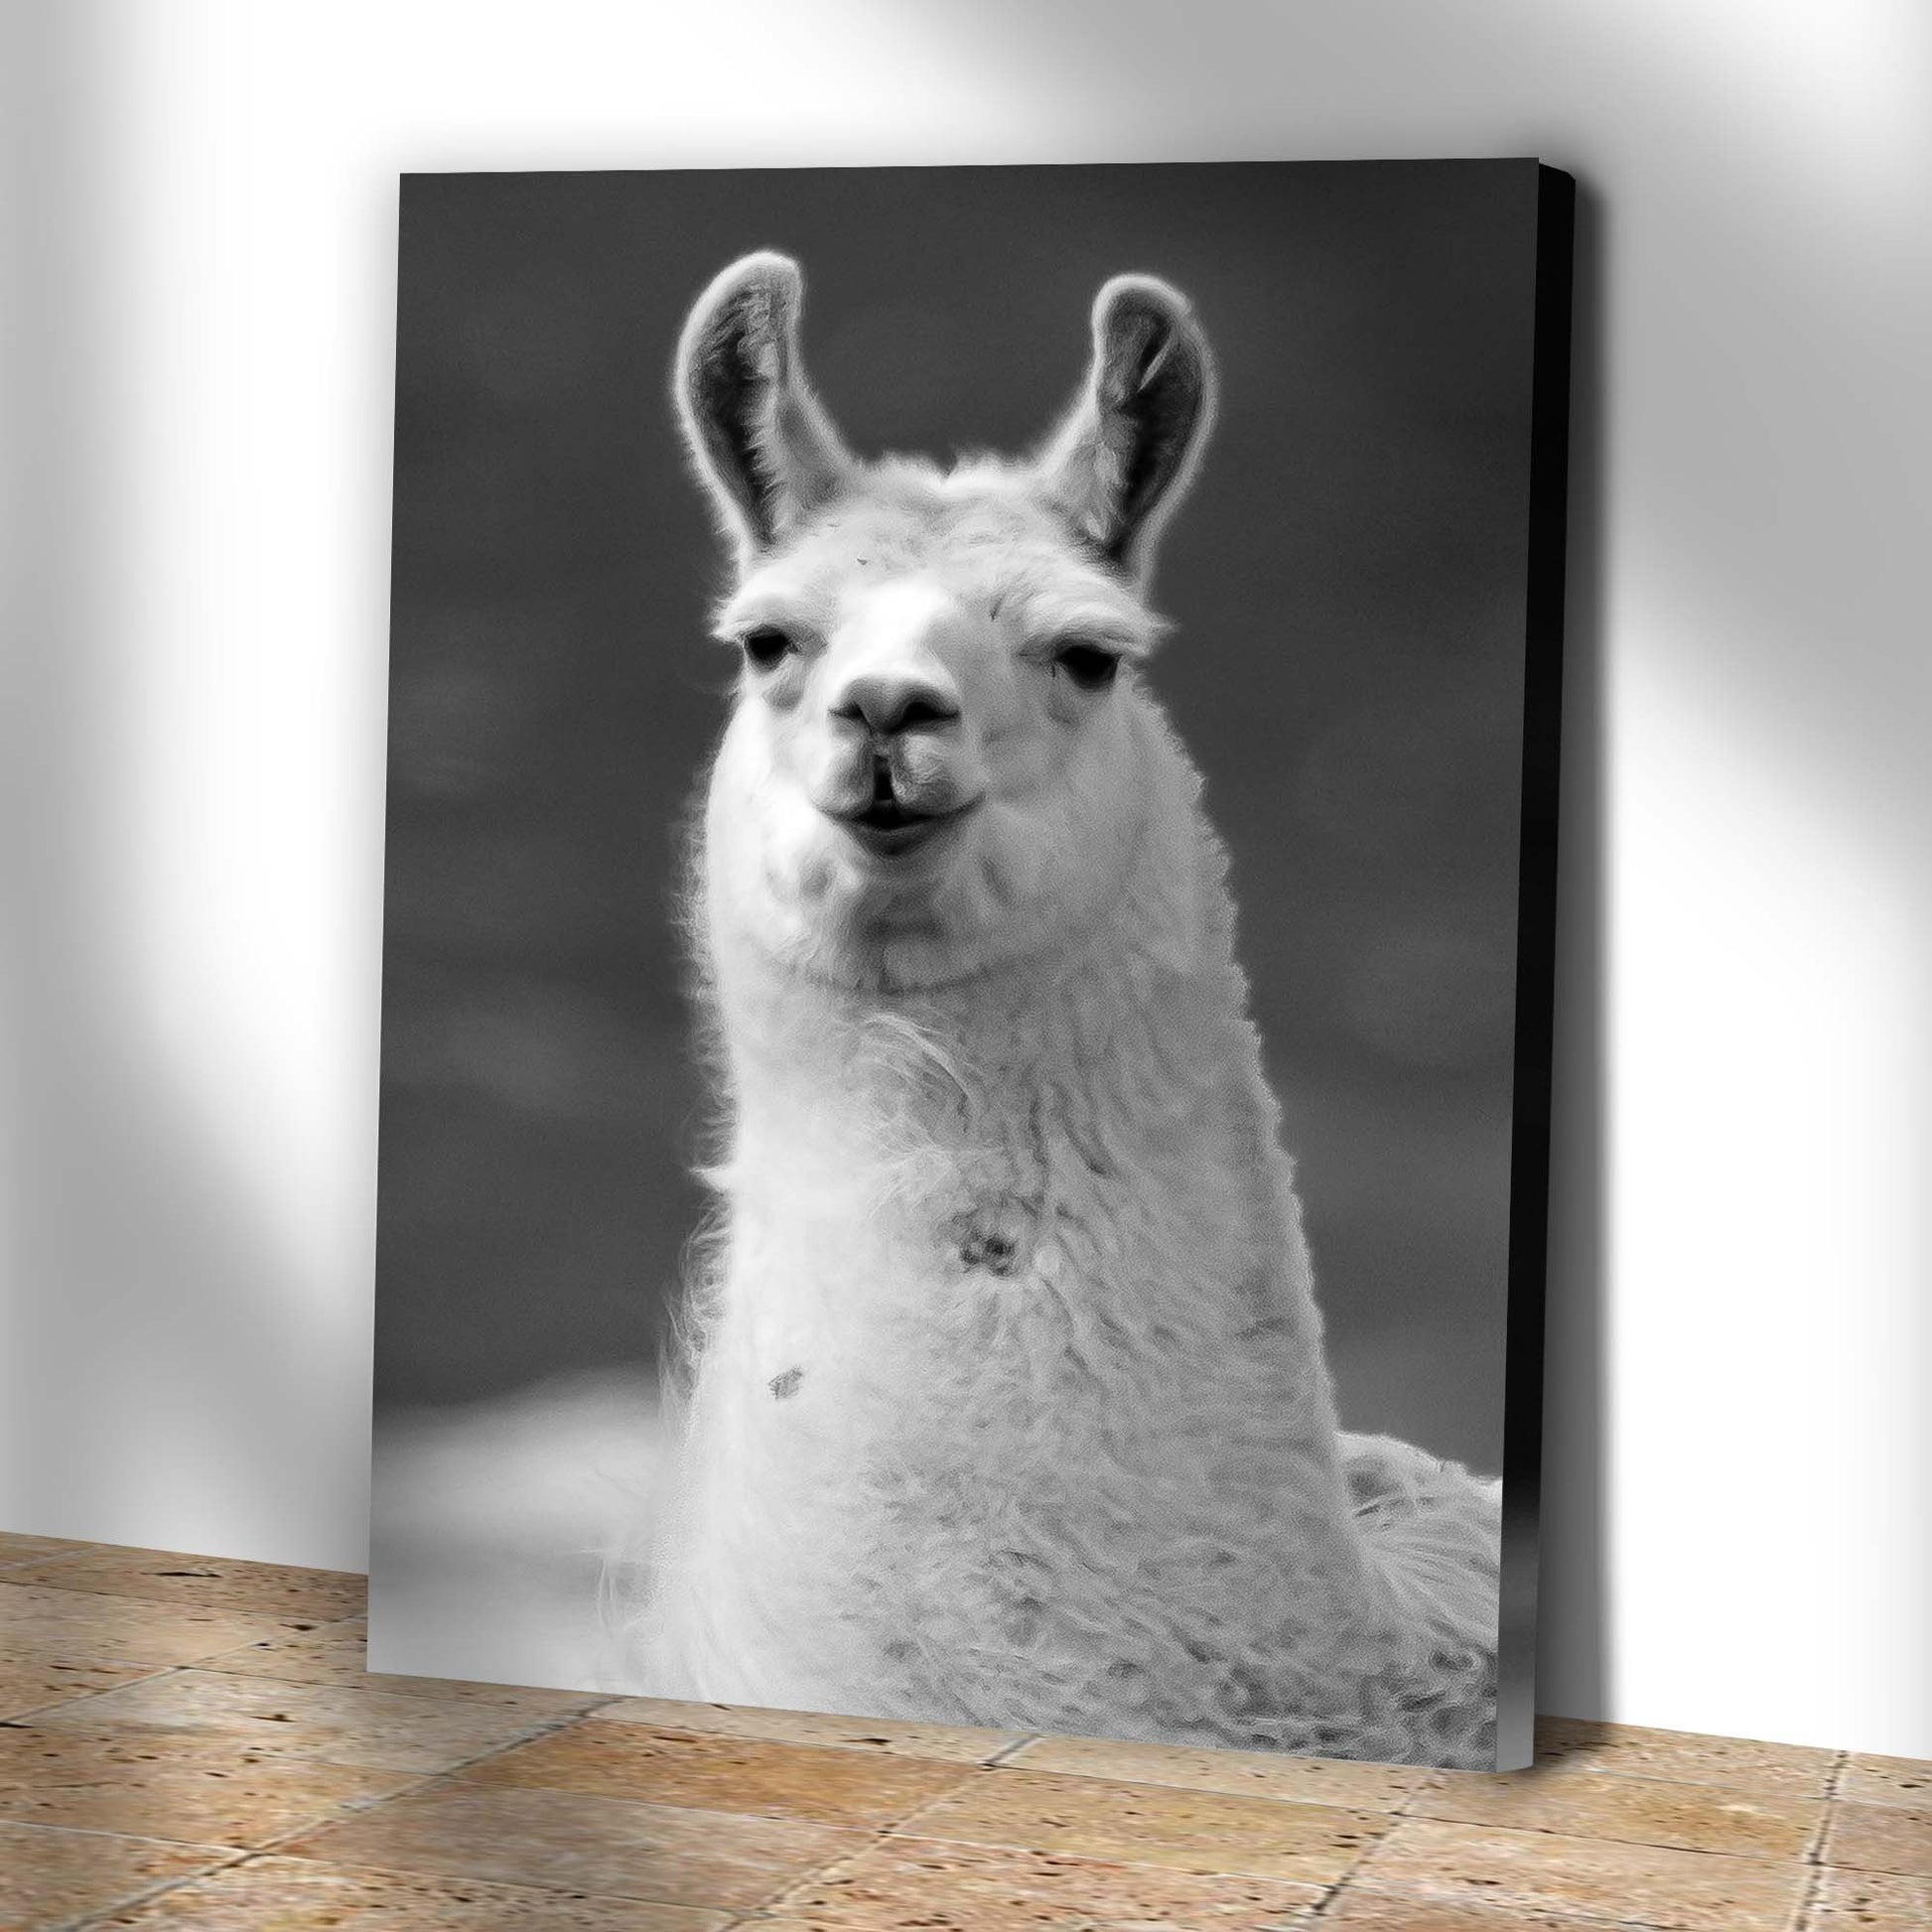 Vague Monochrome Llama Portrait Canvas Wall Art Style 2 - Image by Tailored Canvases